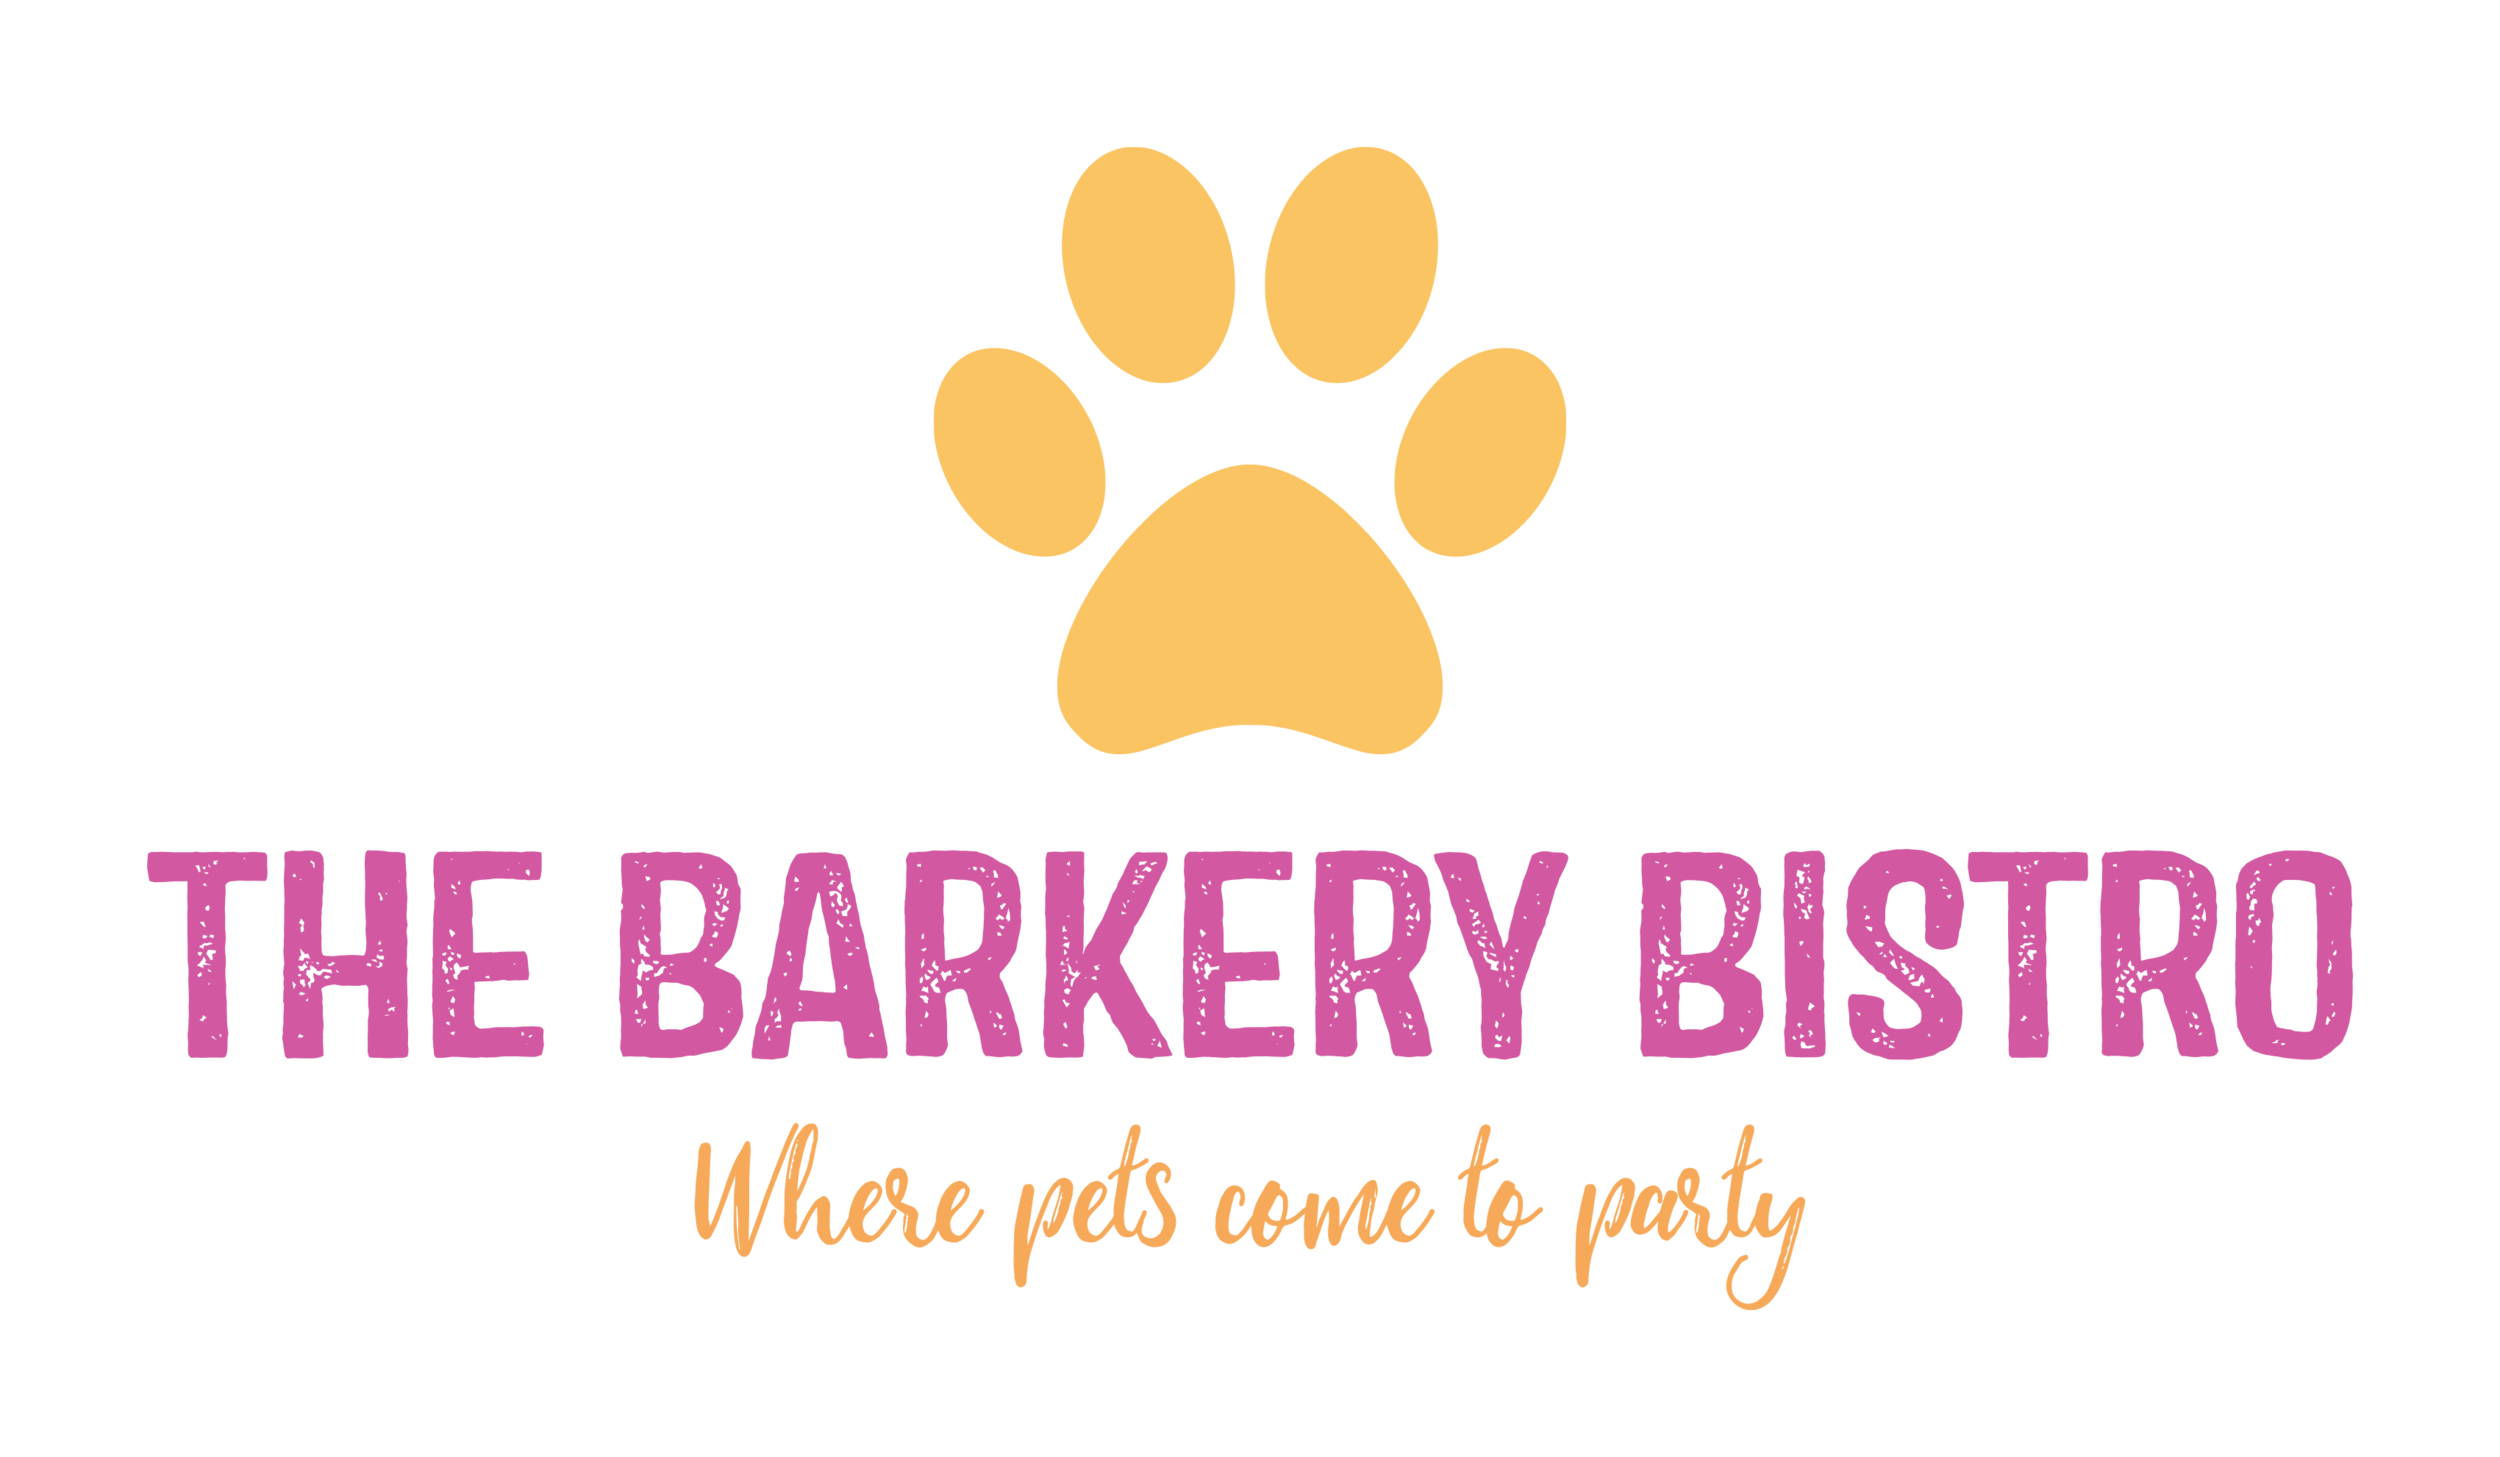 Company logo of The Barkery Bistro, Pet Bakery & Grooming